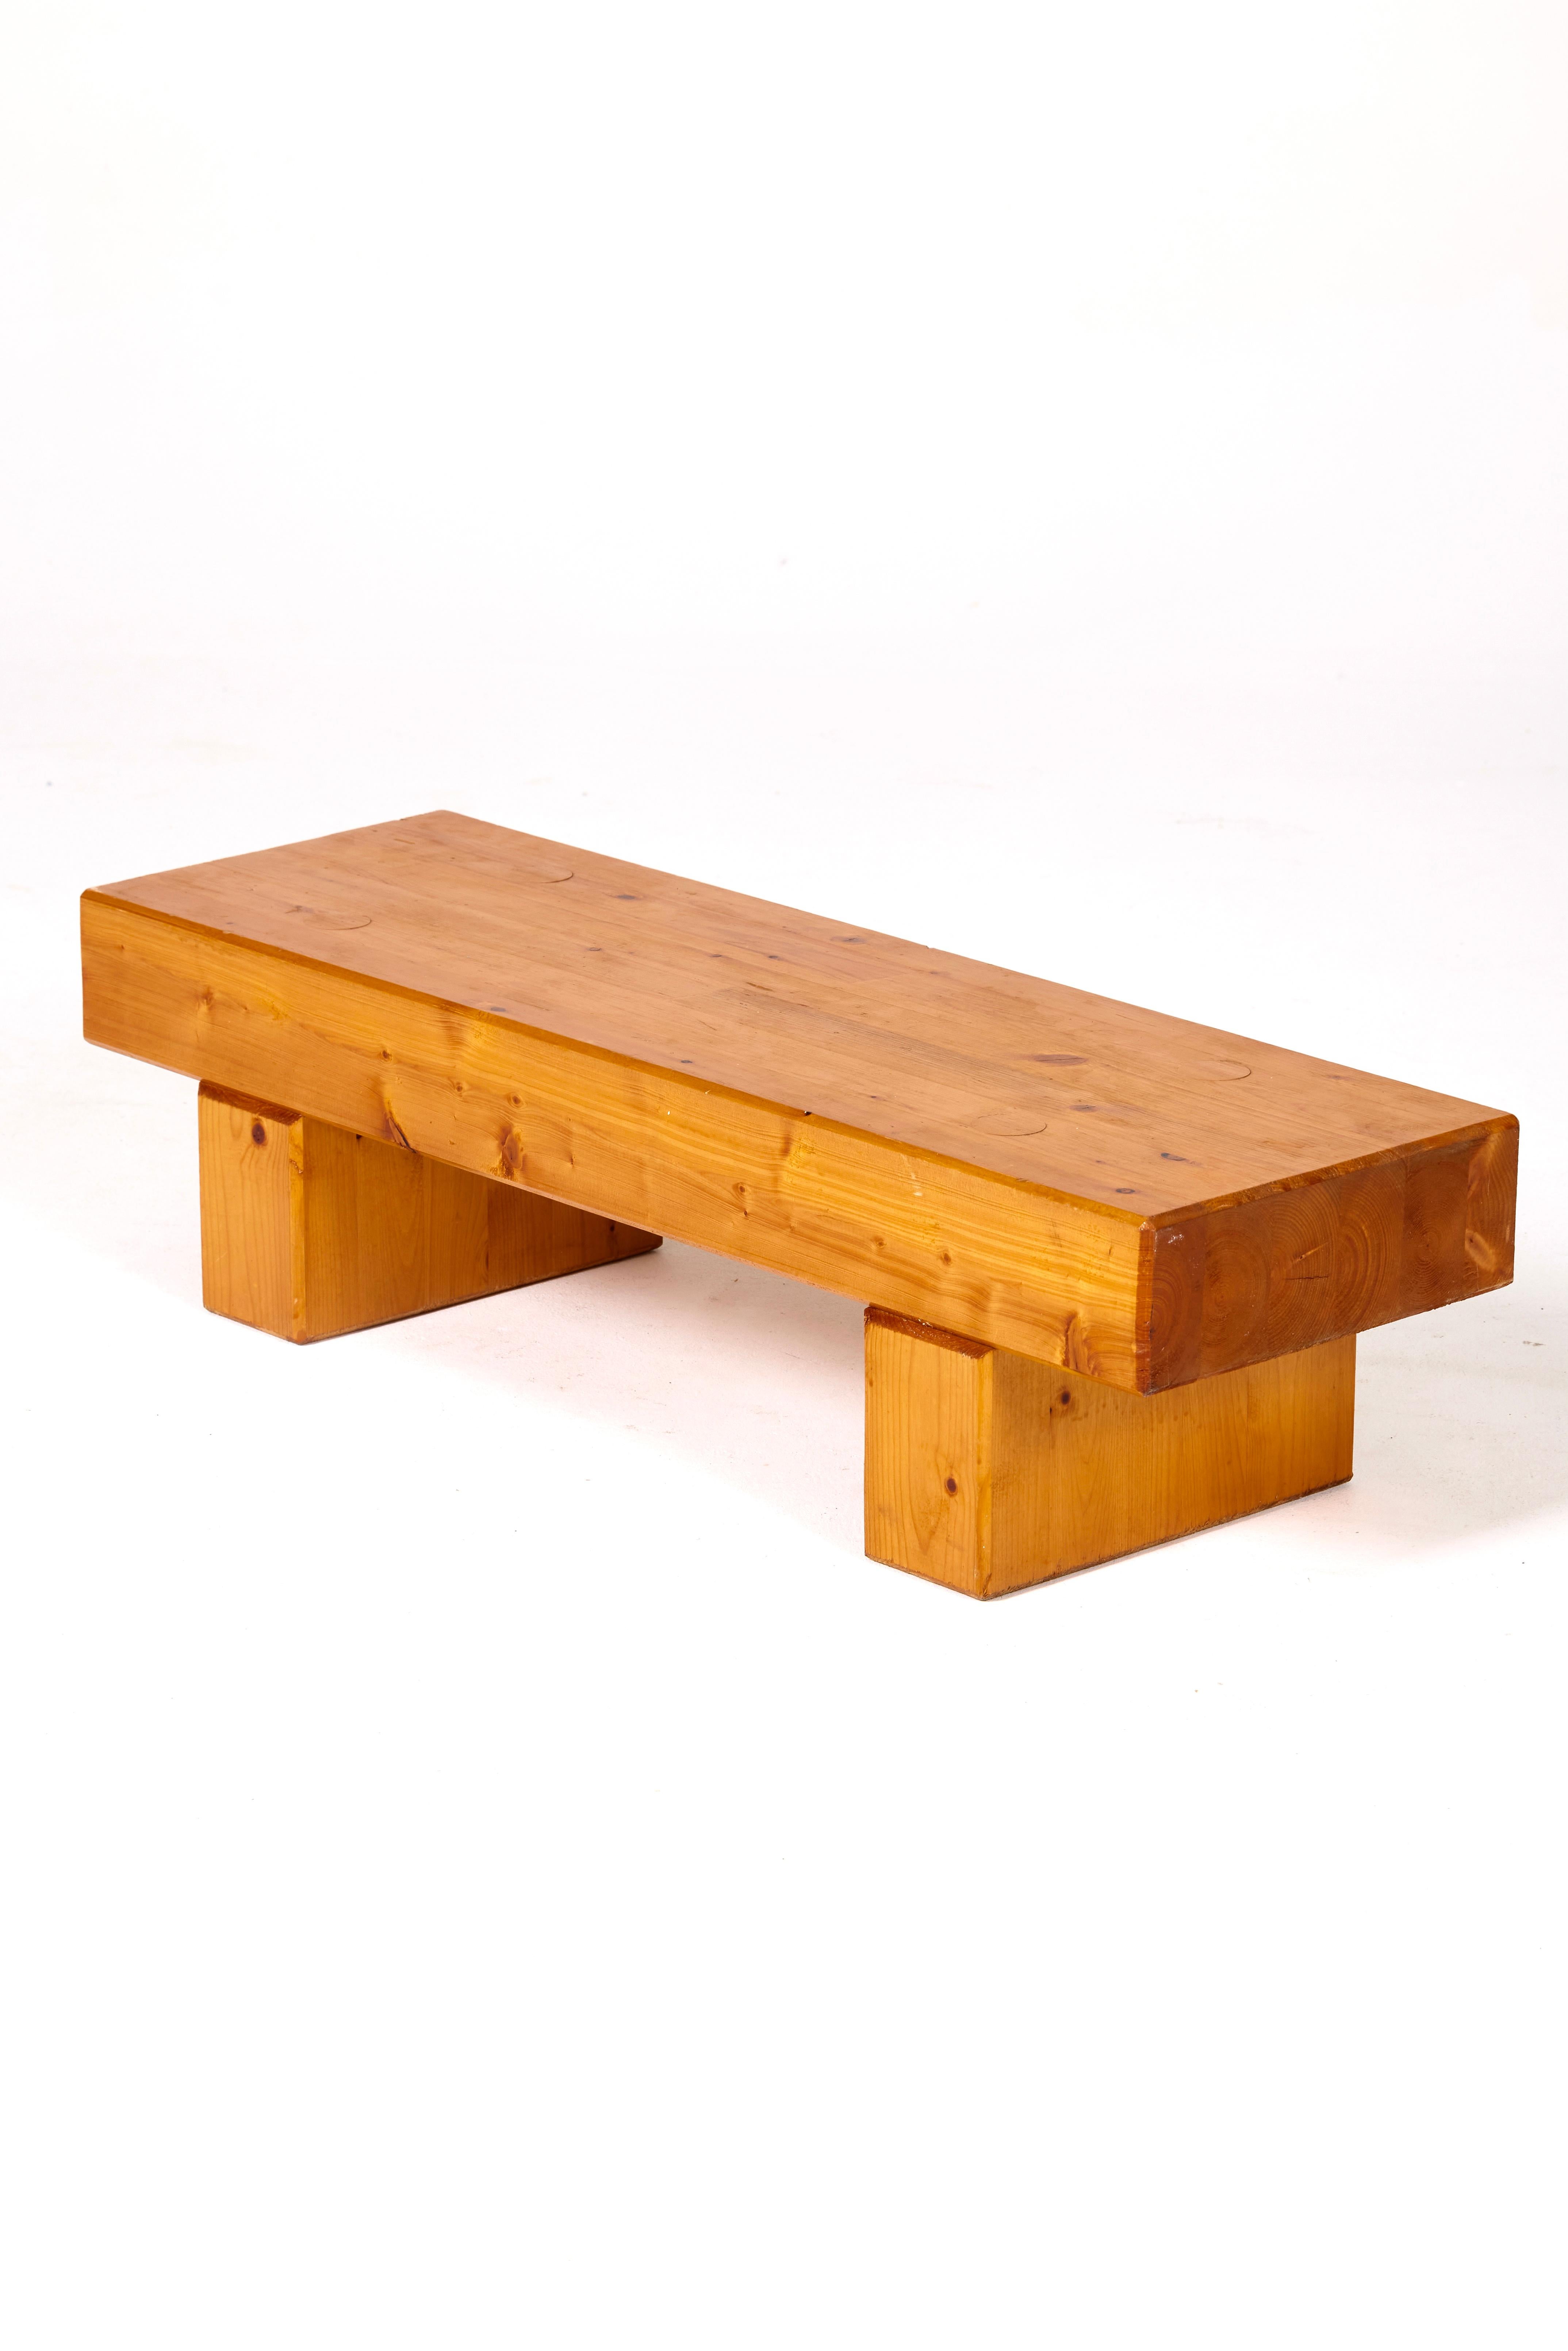 Small occasional bench in solid pine. It will be perfectly suited for a child's room or for a Japanese atmosphere.
LP1388